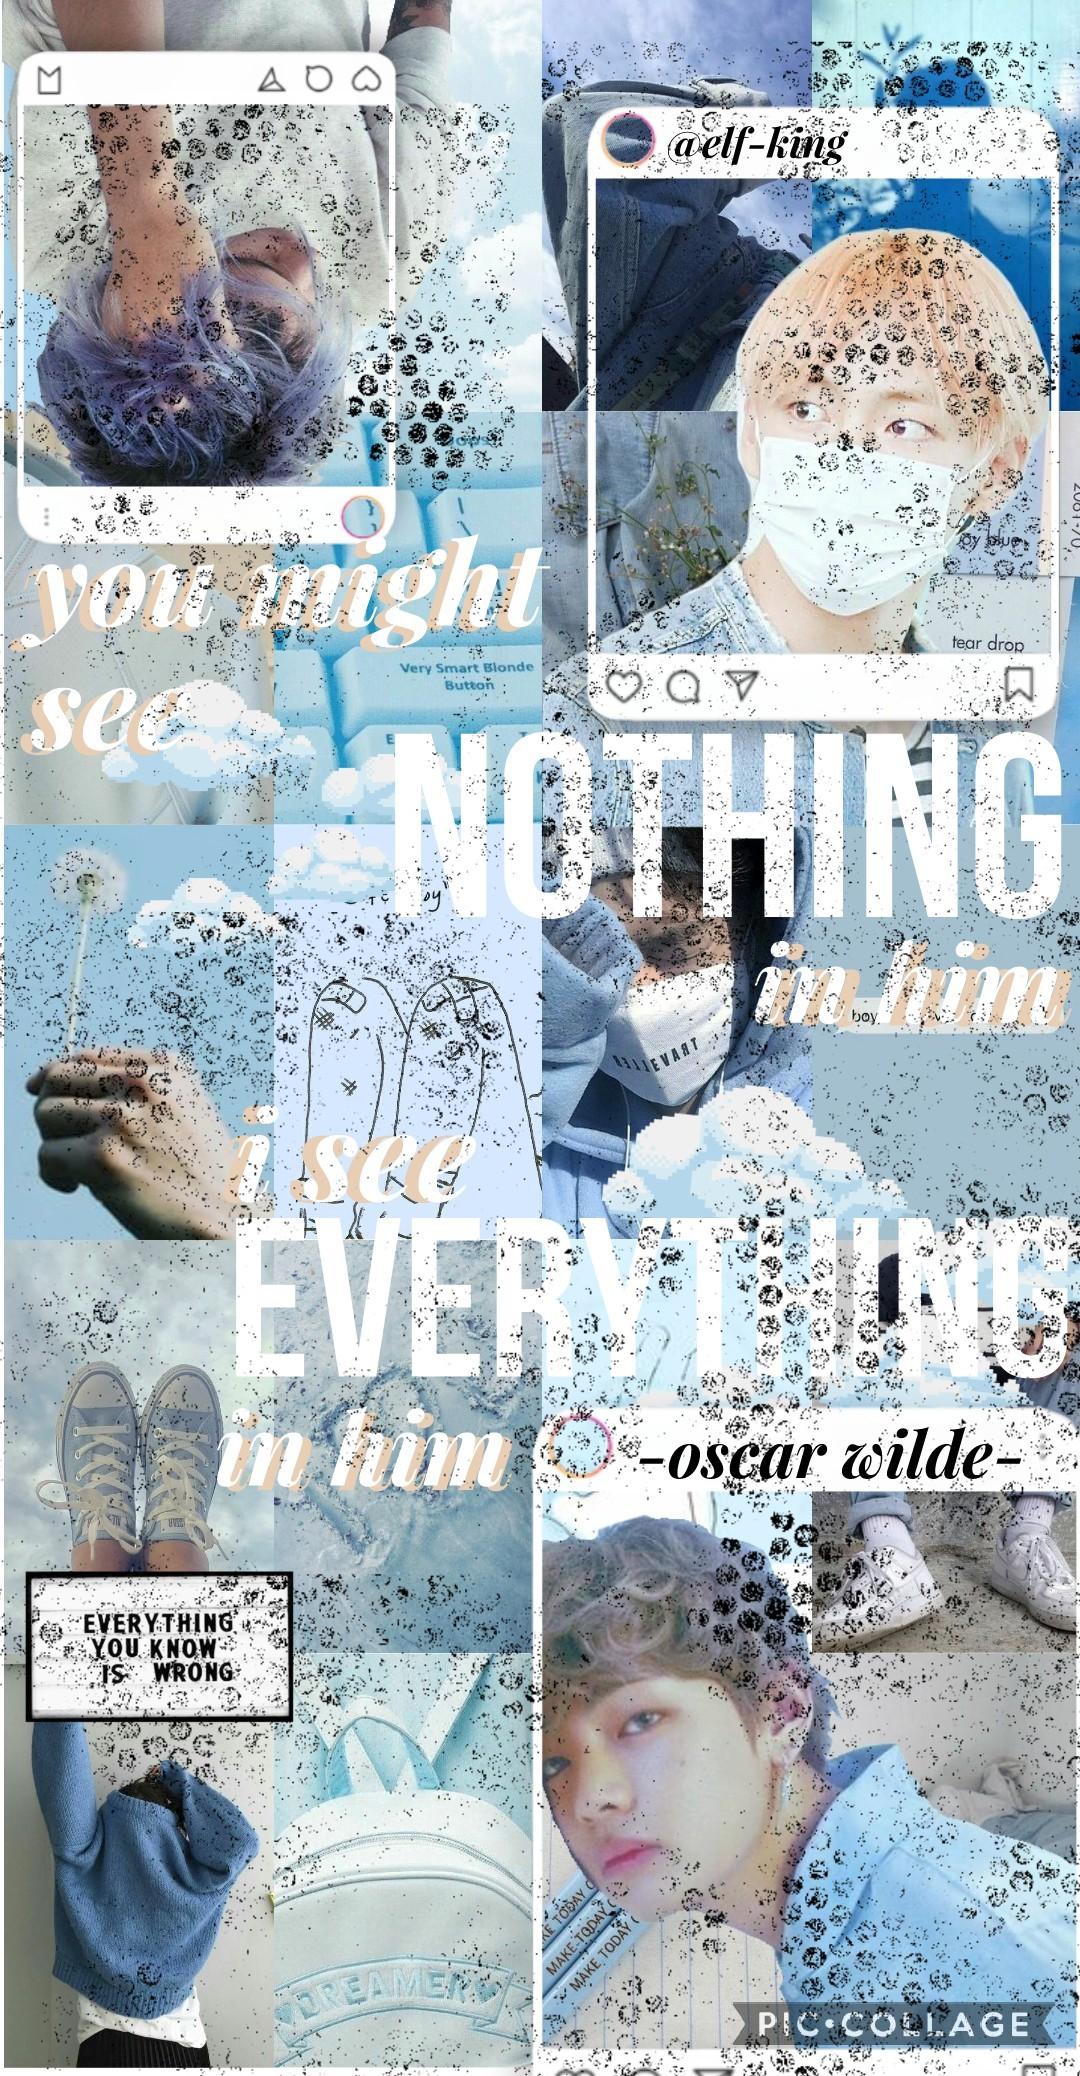 do i have an unhealthy obsession with oscar wilde?
yes.
yes i do.